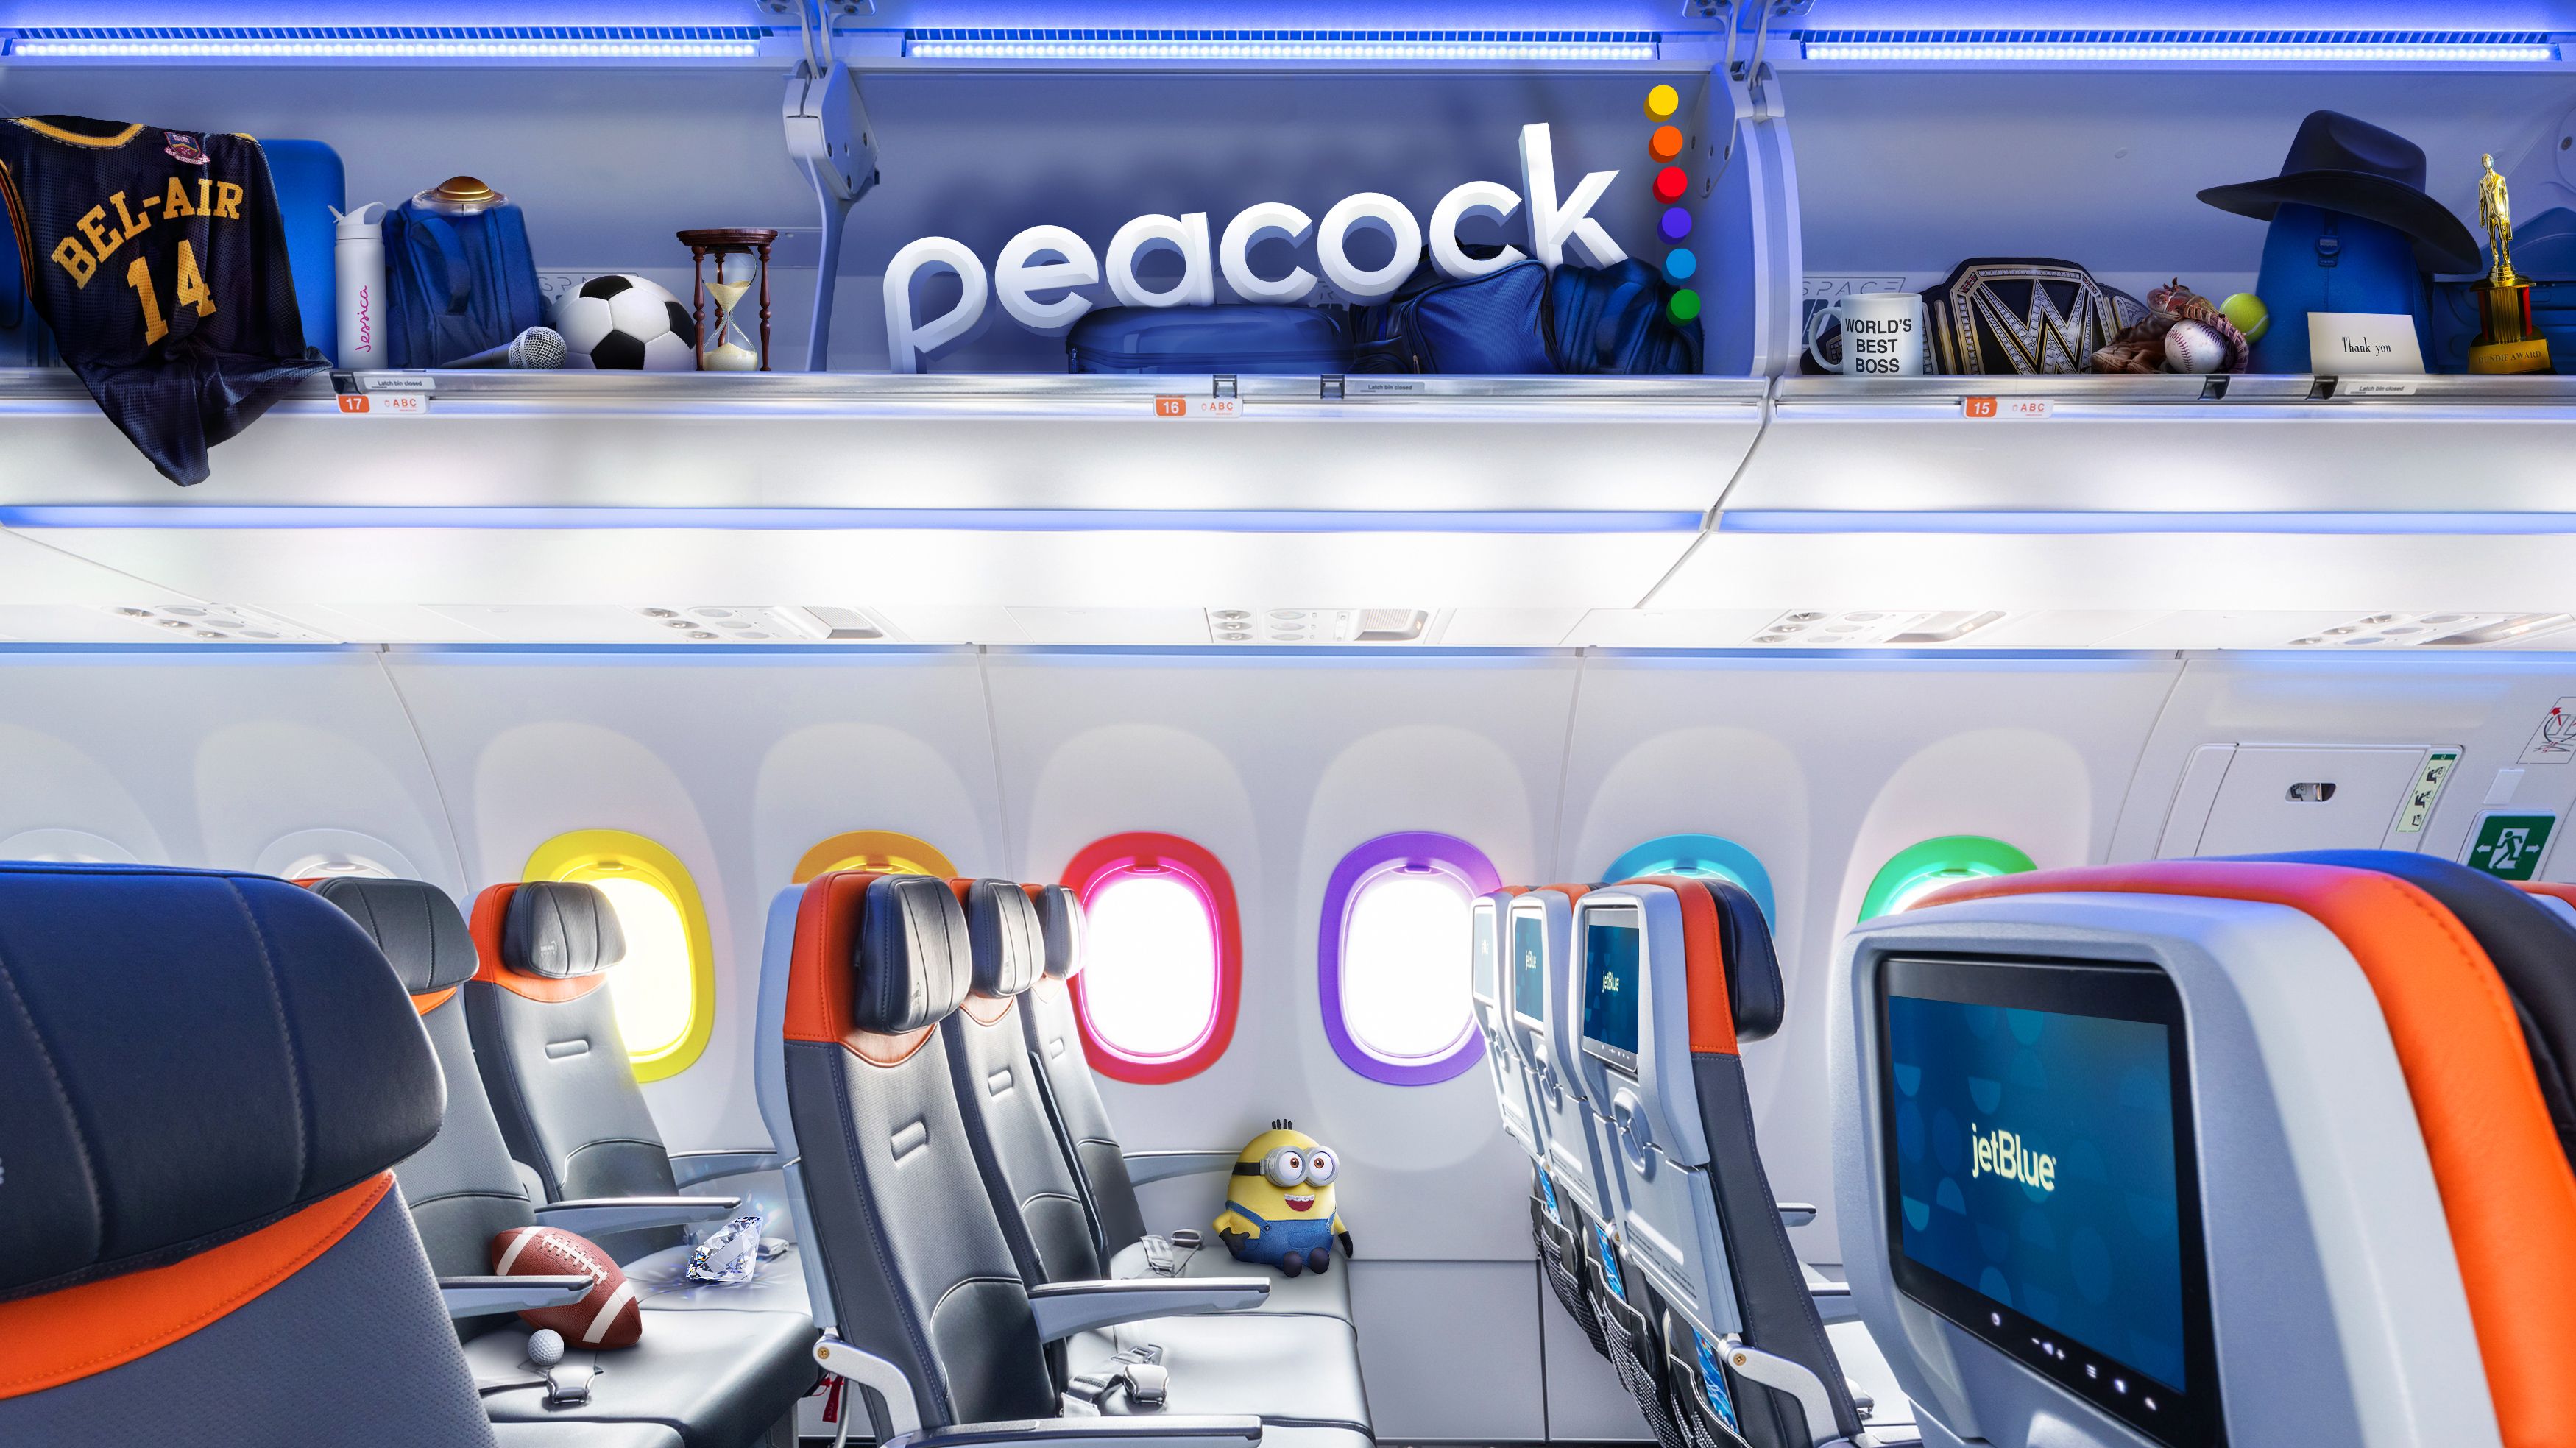 JetBlue Launches New Inflight Leisure Partnership With Peacock